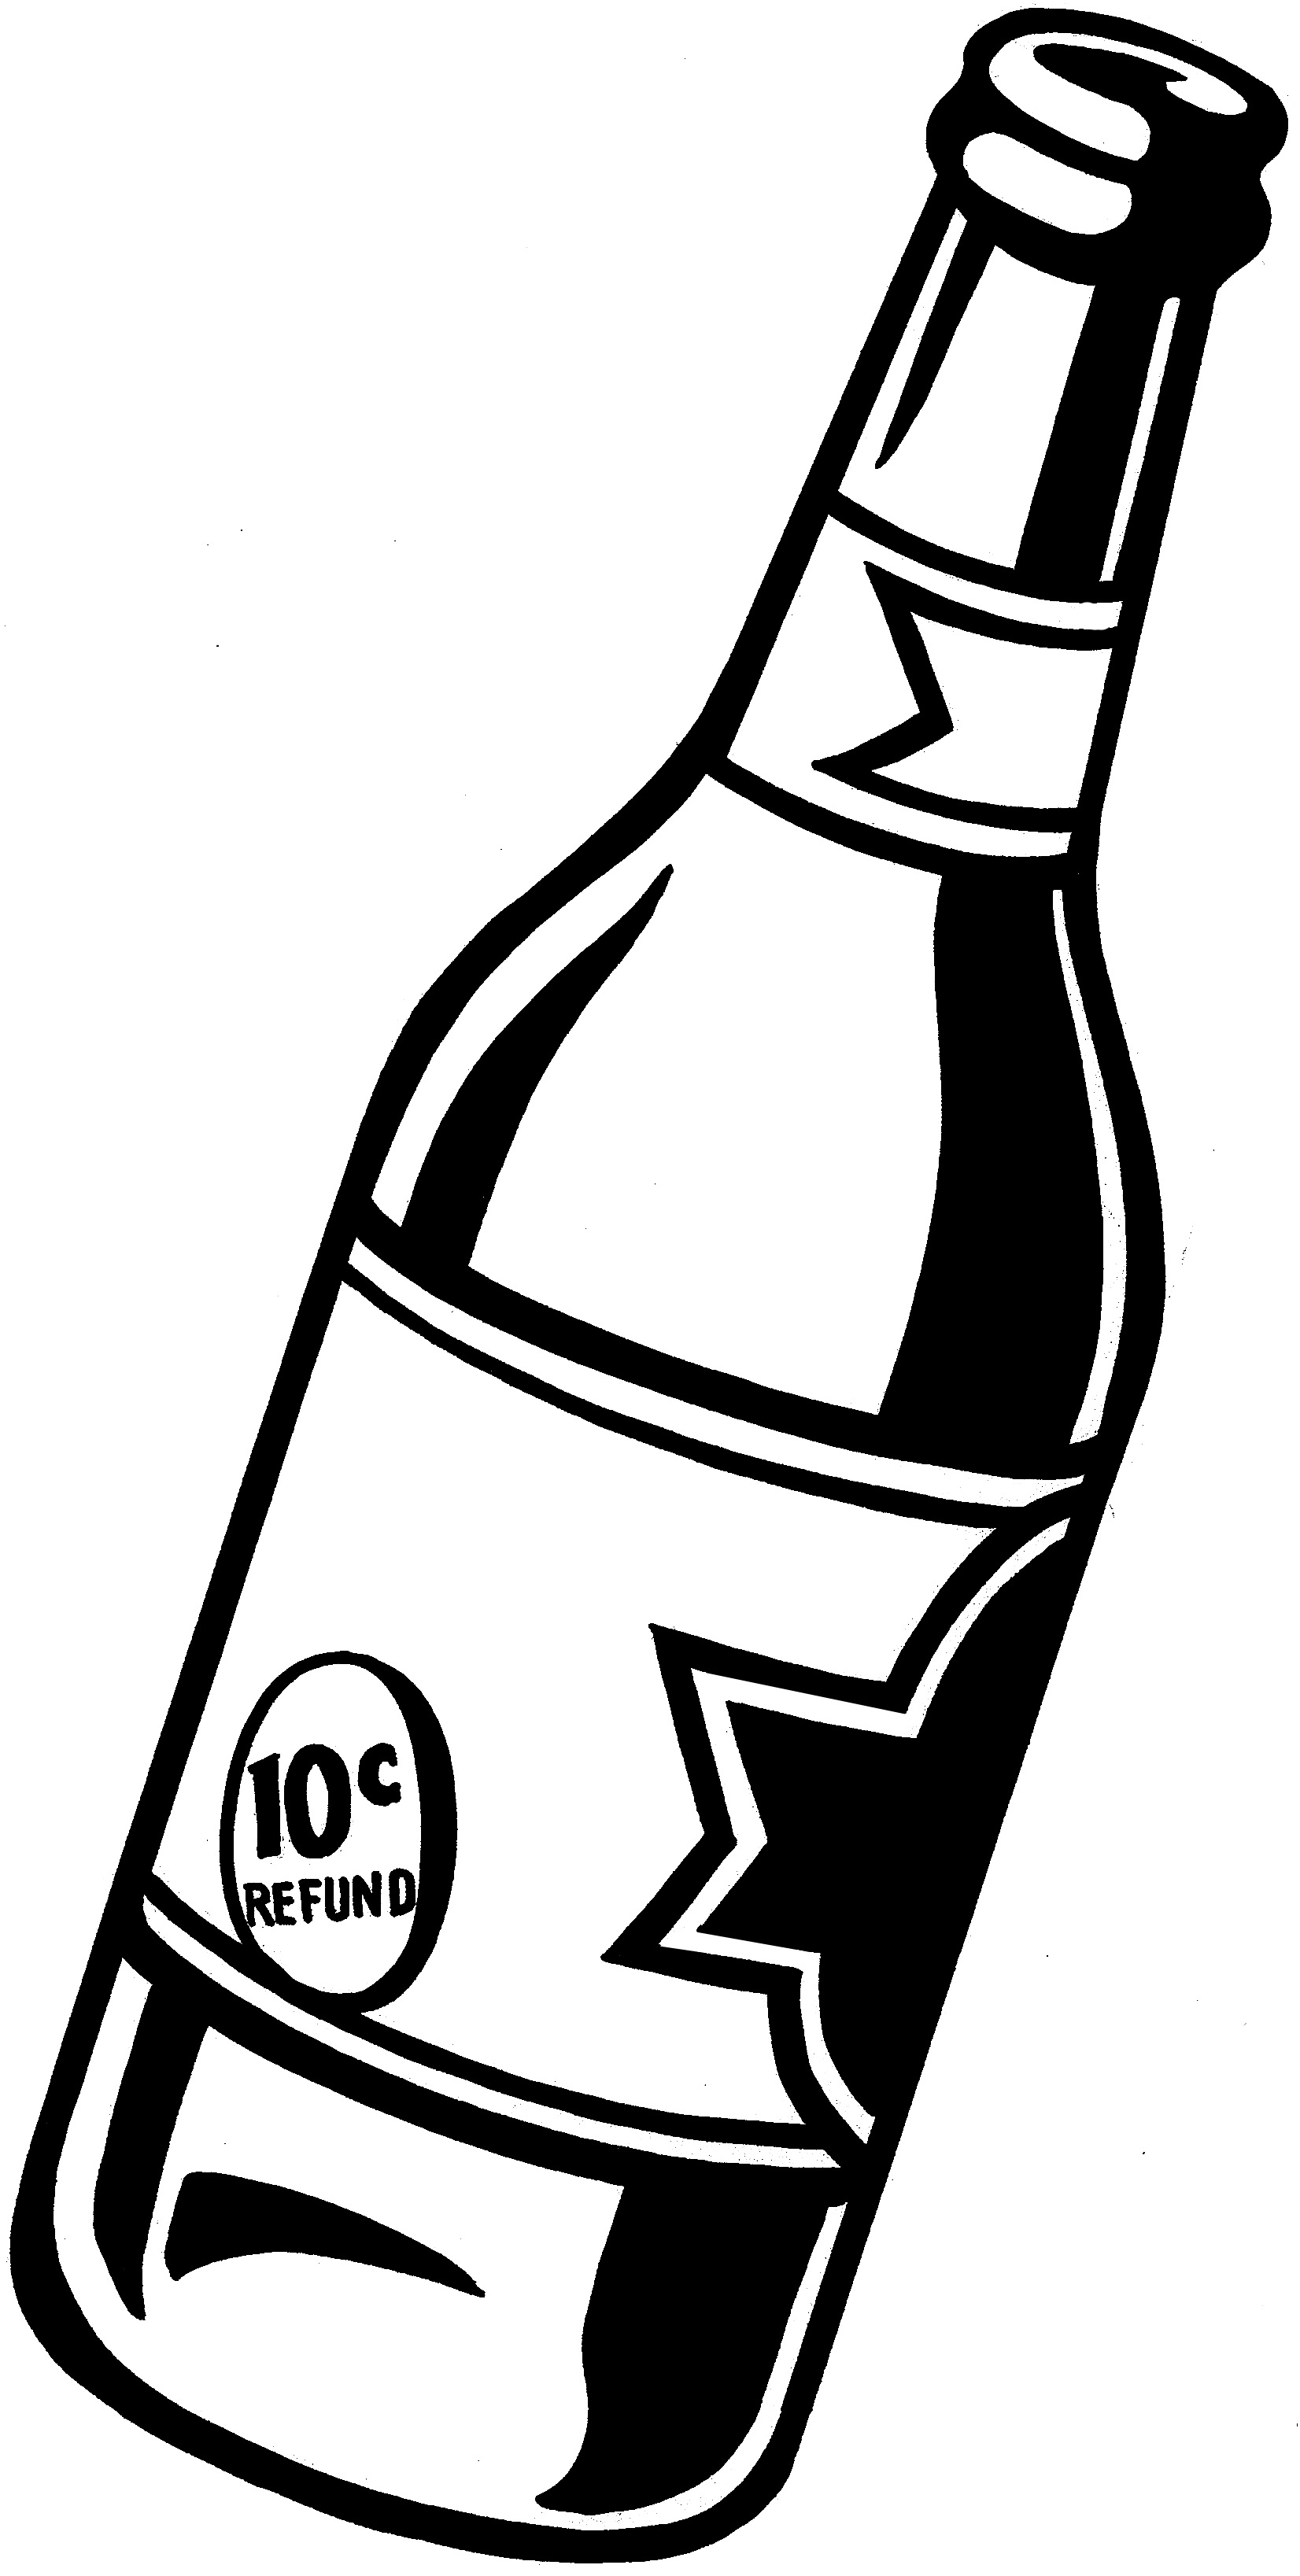 Free Beer Bottle Black And White, Download Free Clip Art.